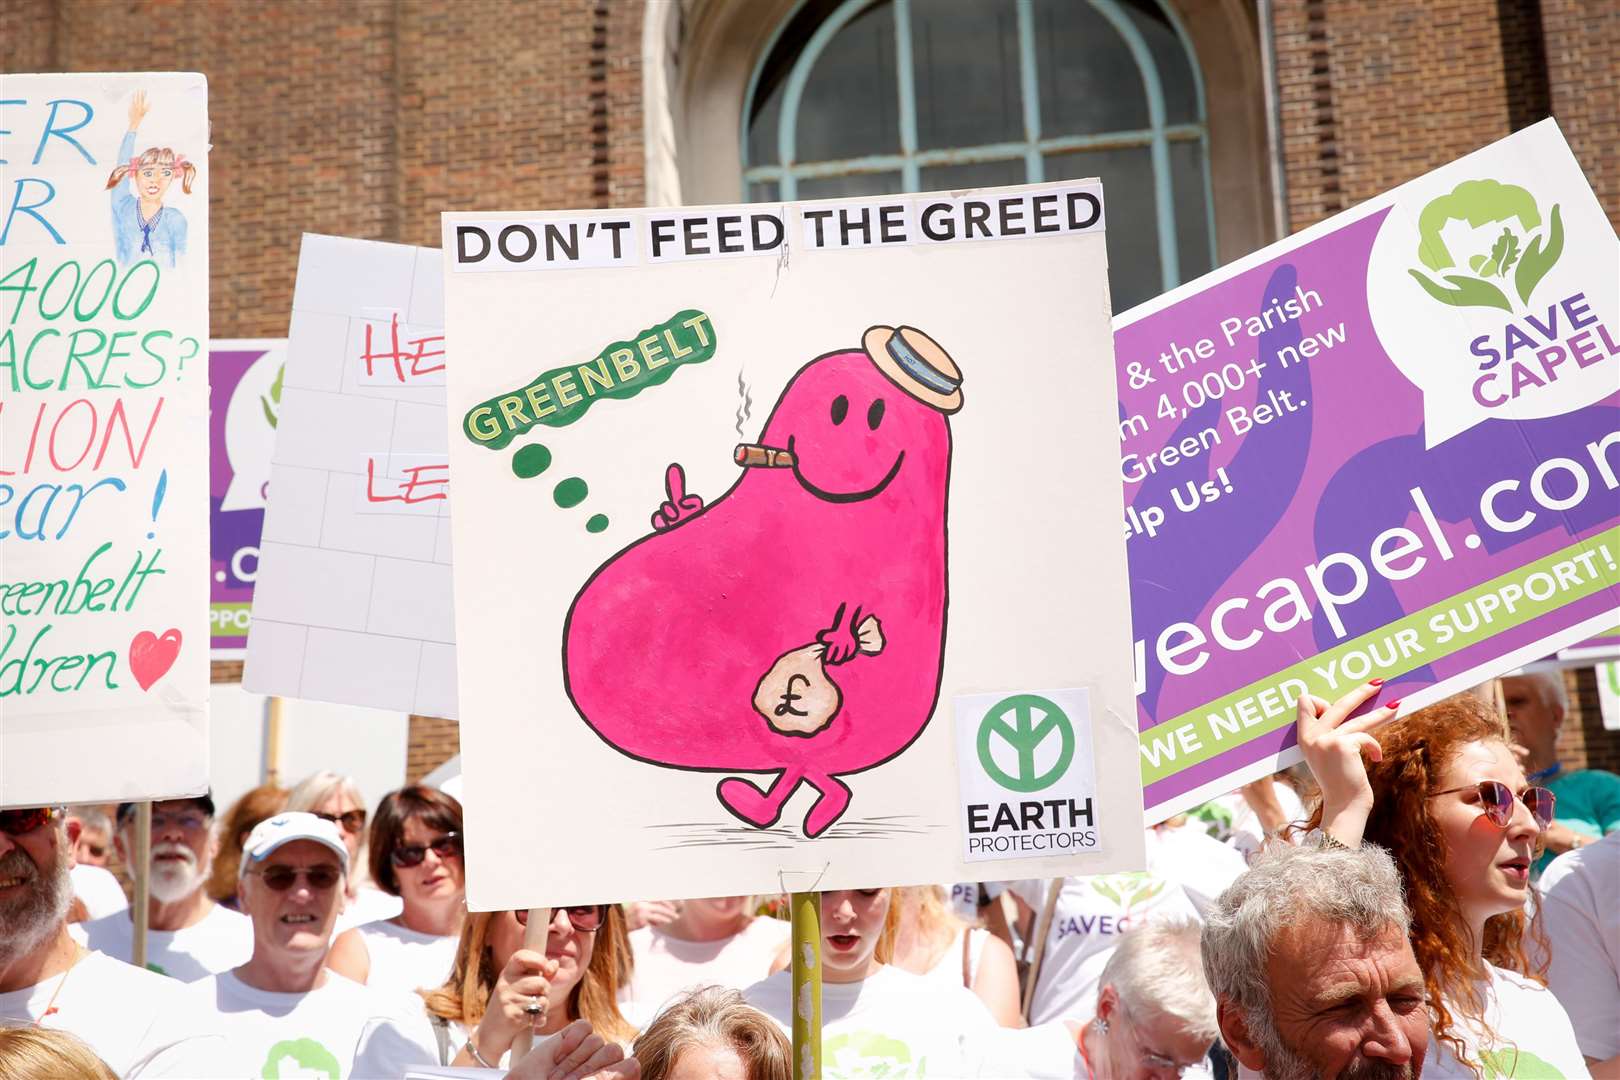 The message to councillors: Don't feed the greed!